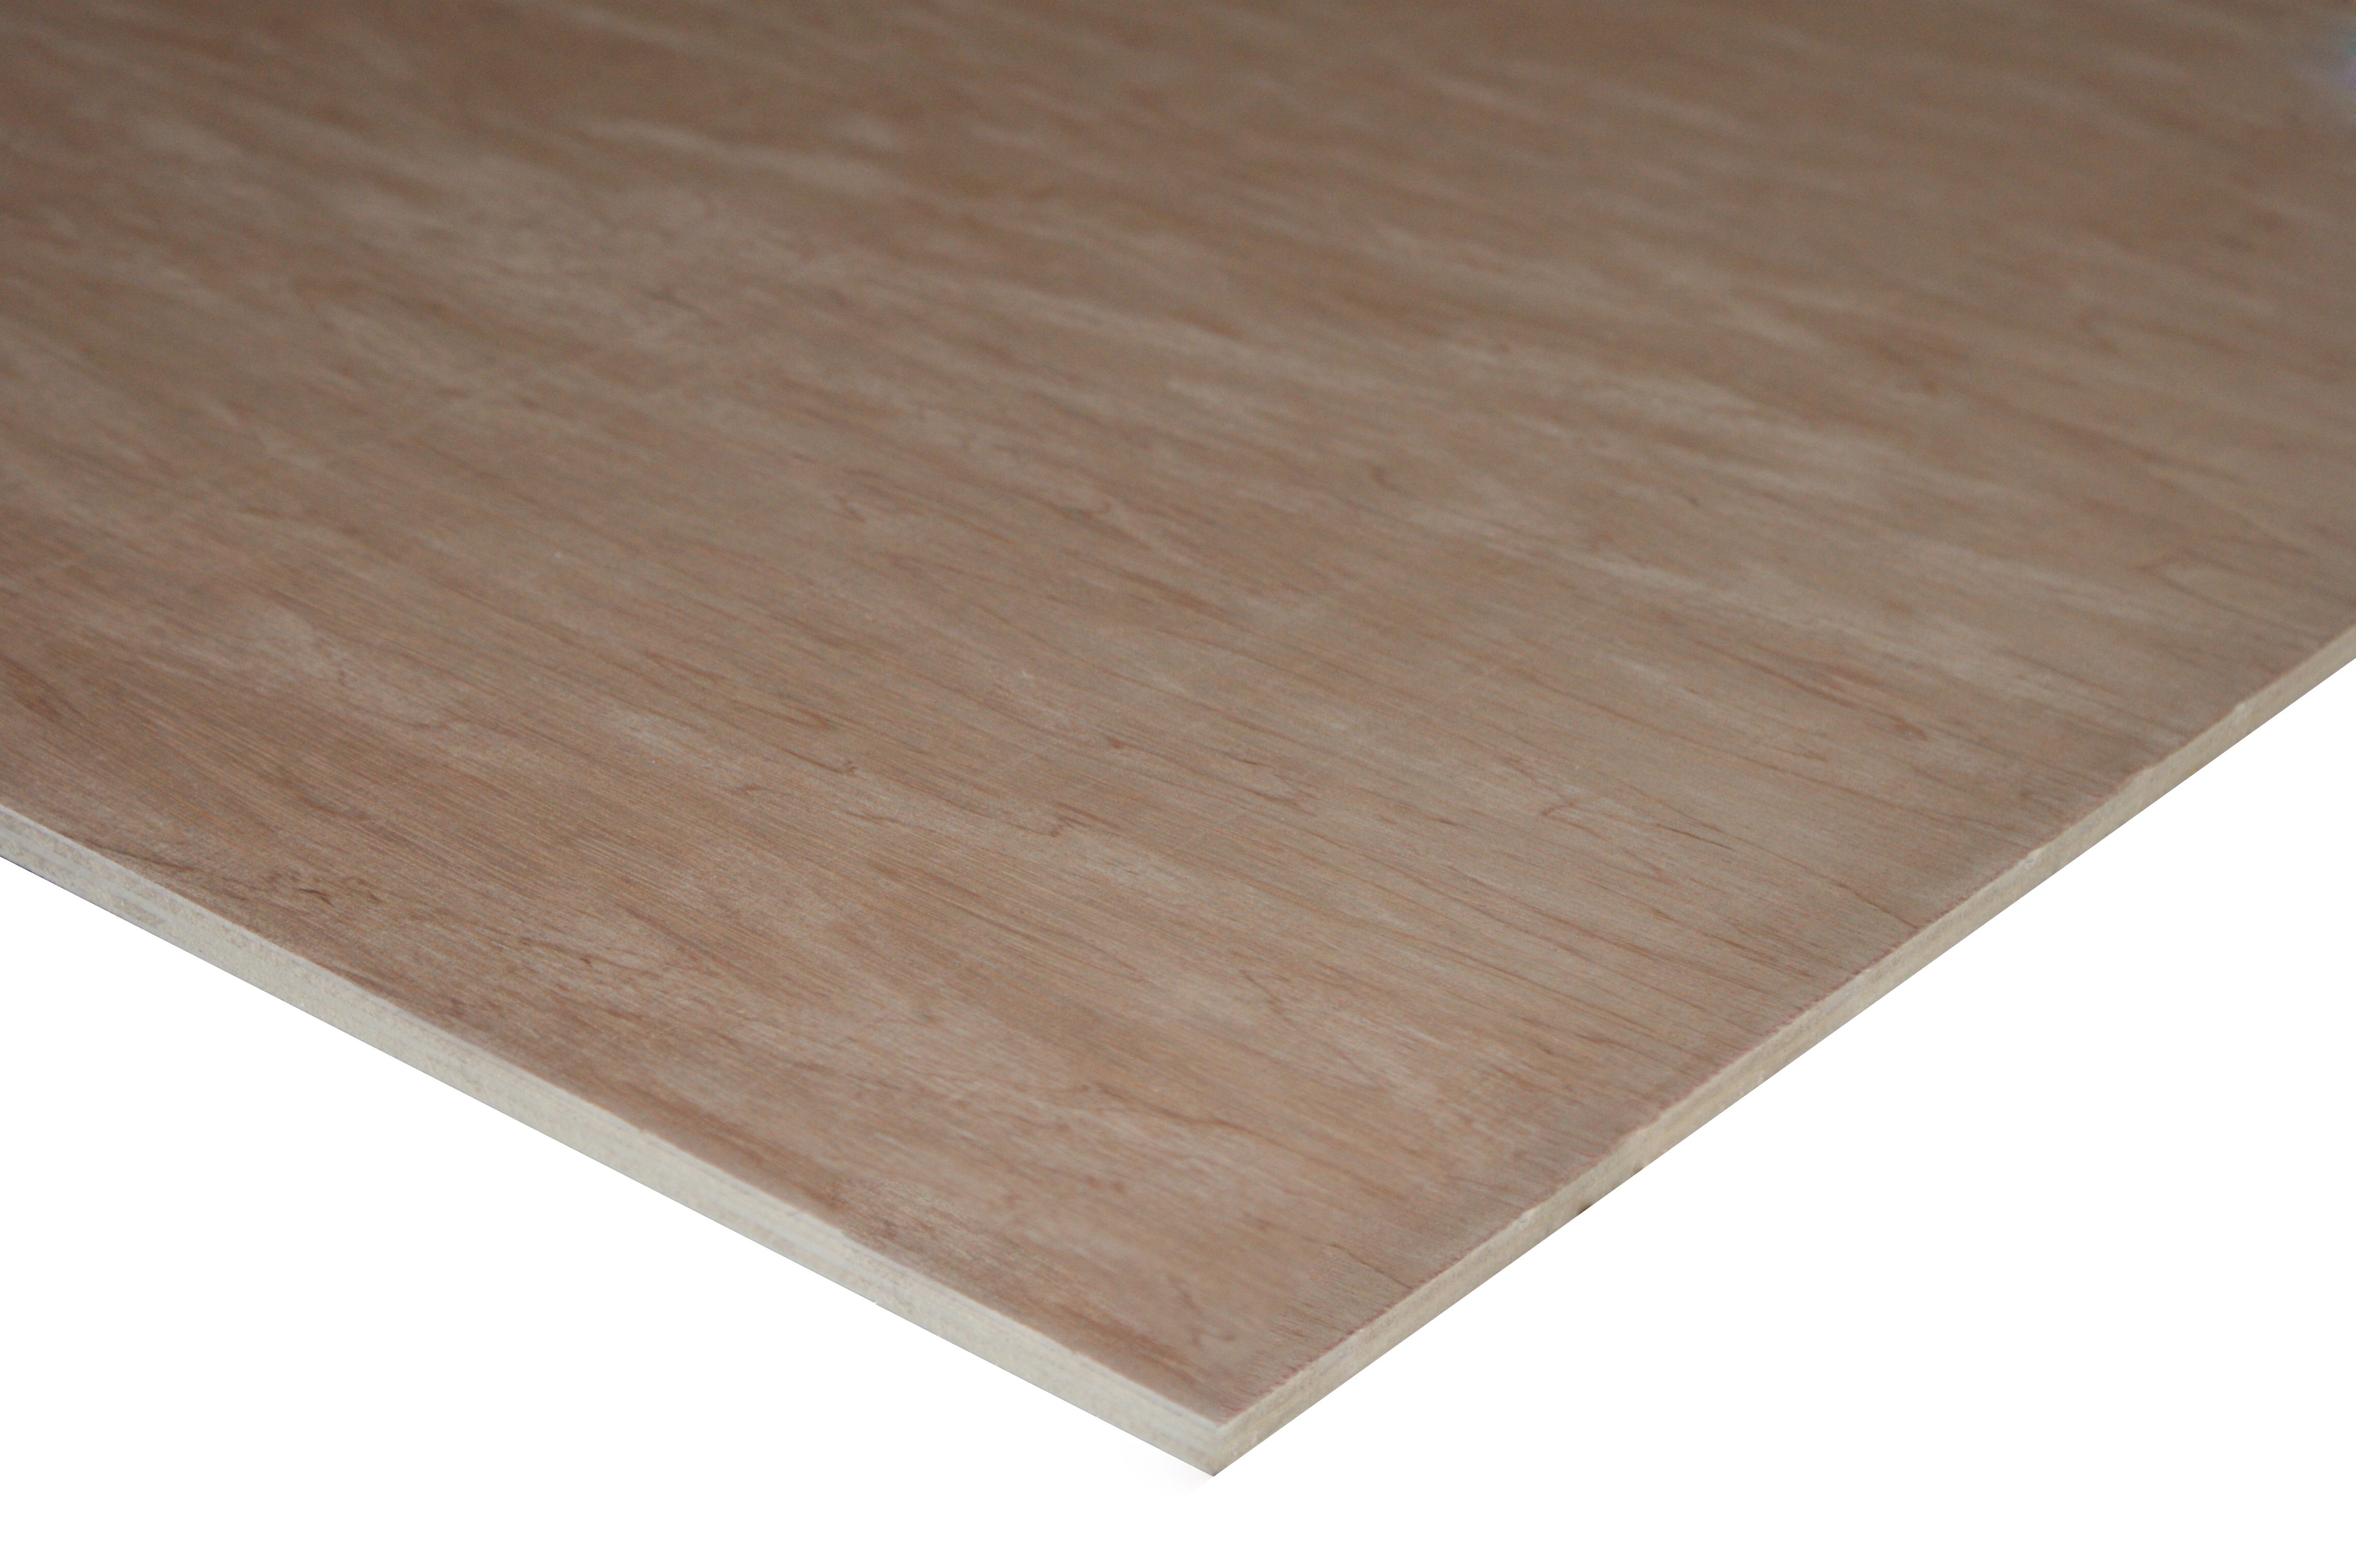 Image of Wickes Non-Structural Hardwood Plywood - 9 x 607 x 1829mm